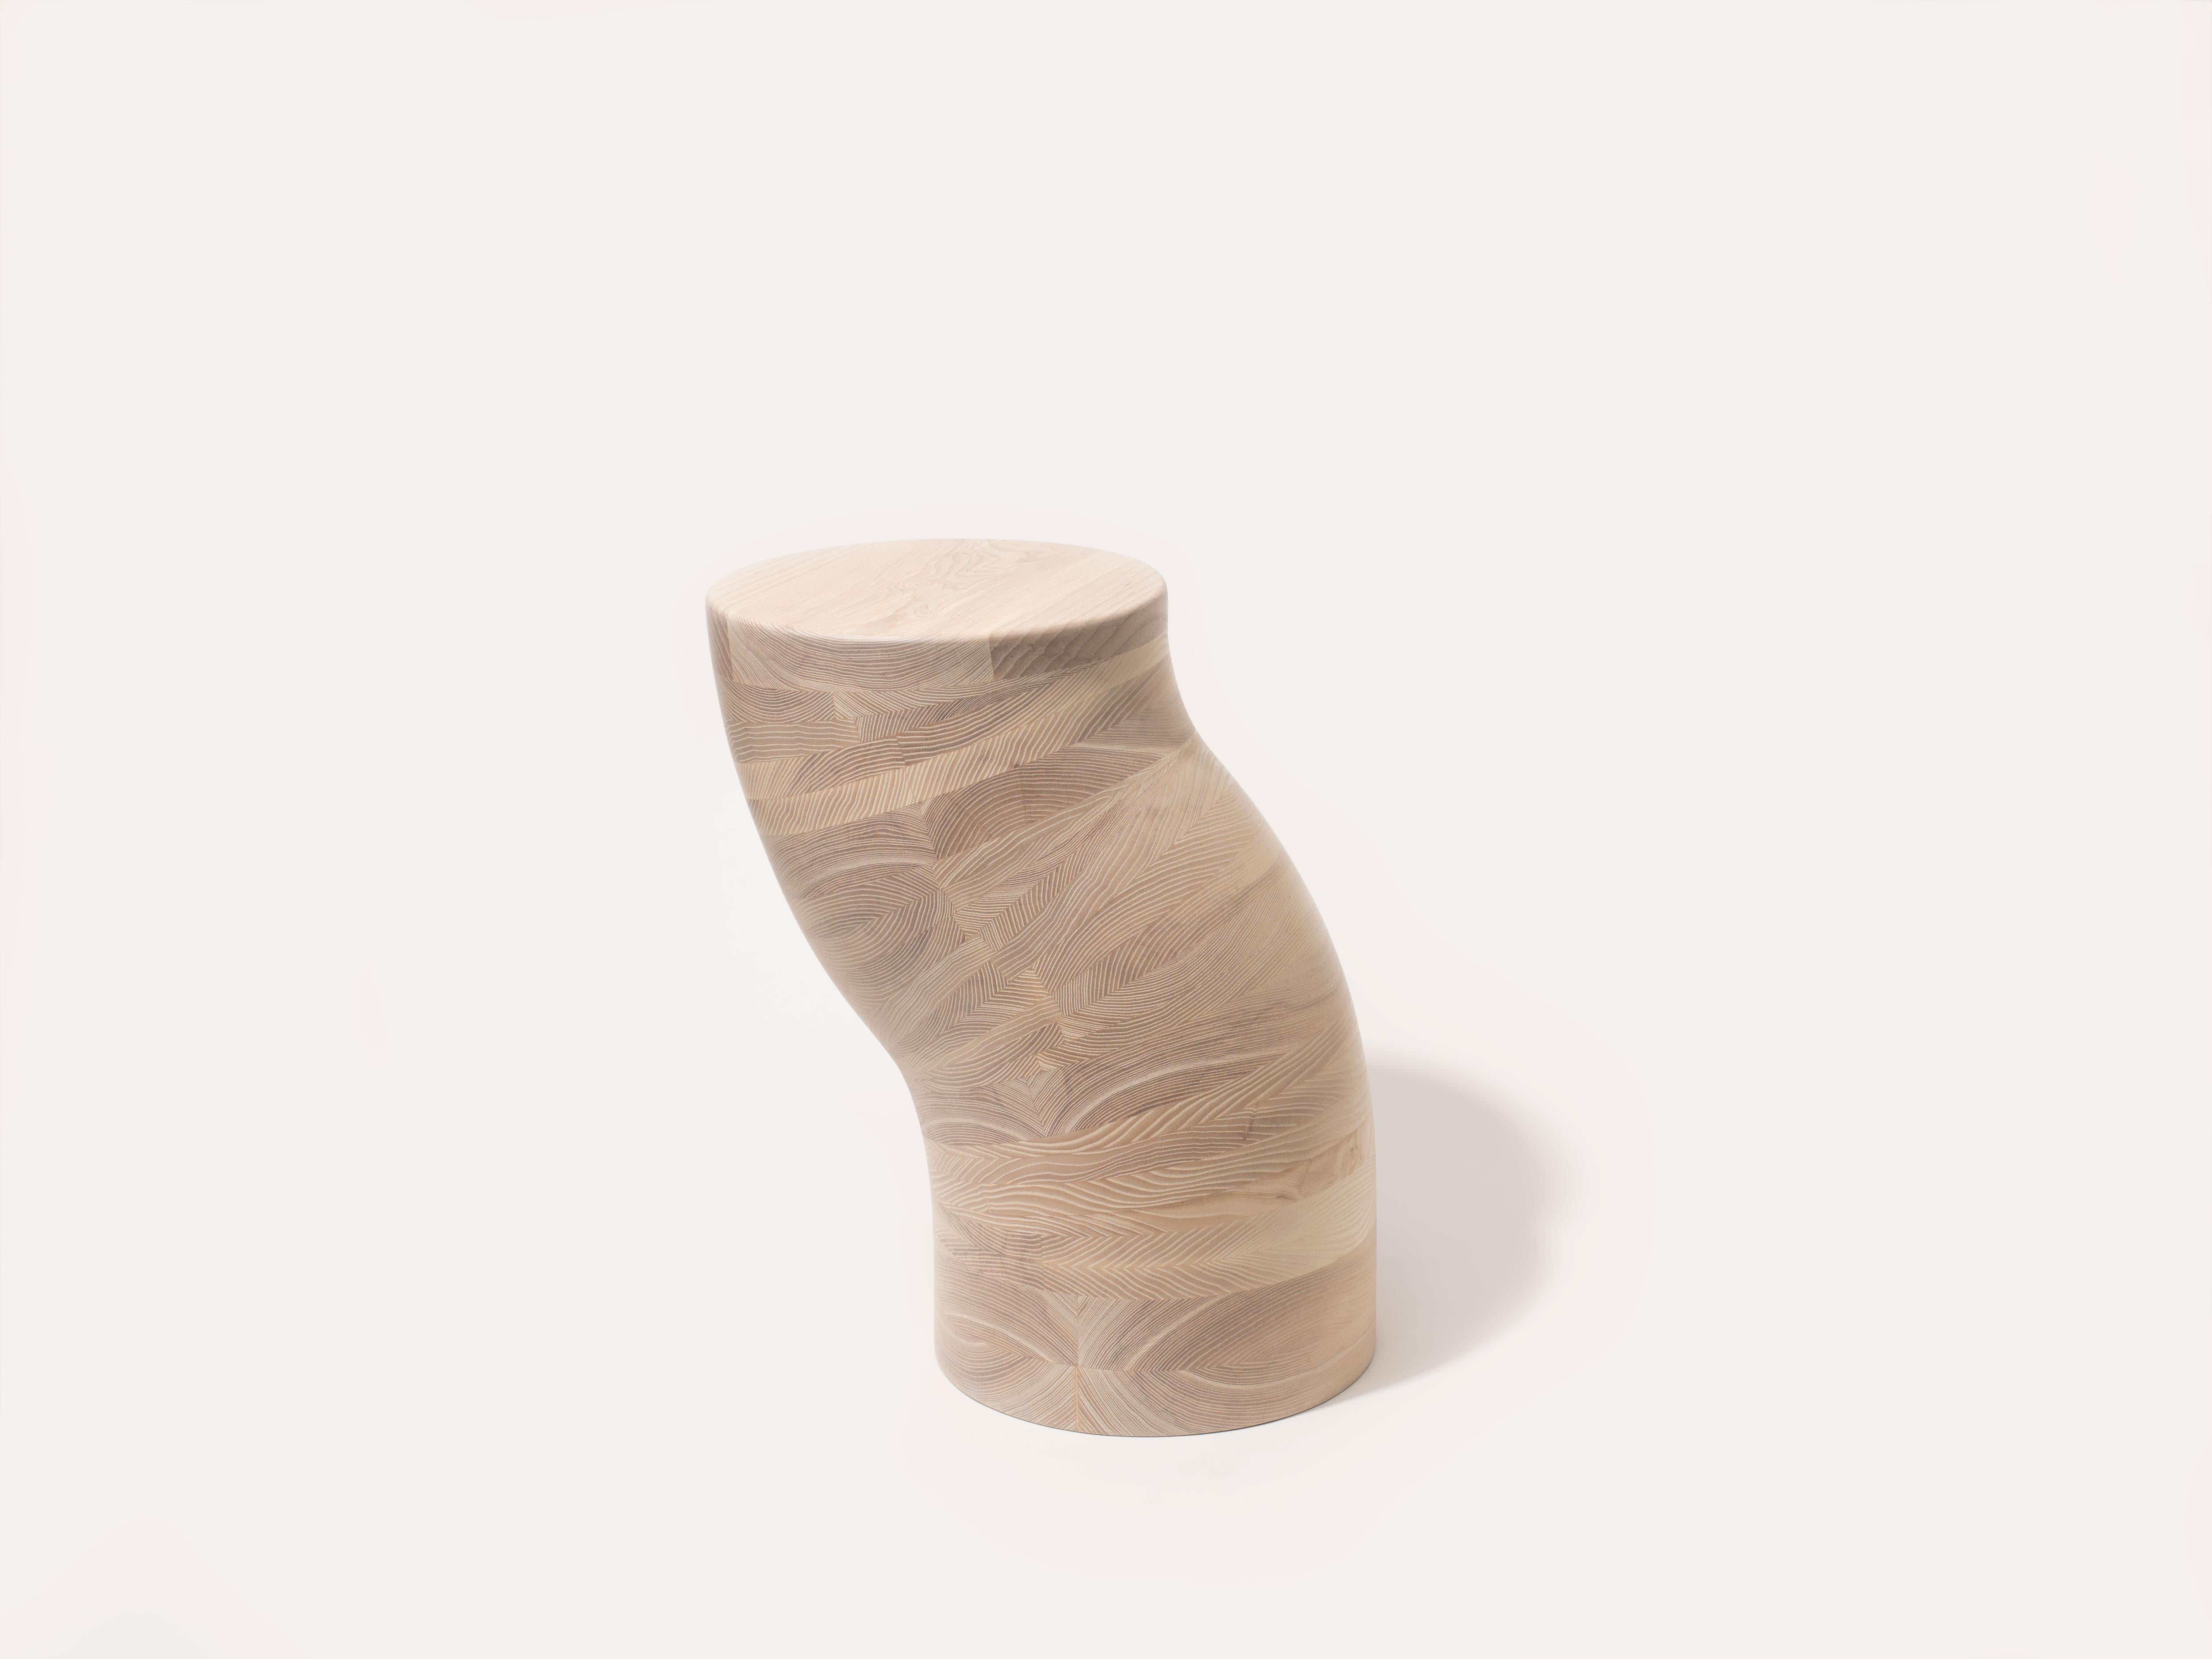 The worm side table is handcrafted out of solid Ash. The Worm Side table is built by laminating tapered layers of ash, then hand carving into shape. Each Worm is unique as each has it's own curvature and wiggle. The base is weighted to aid in